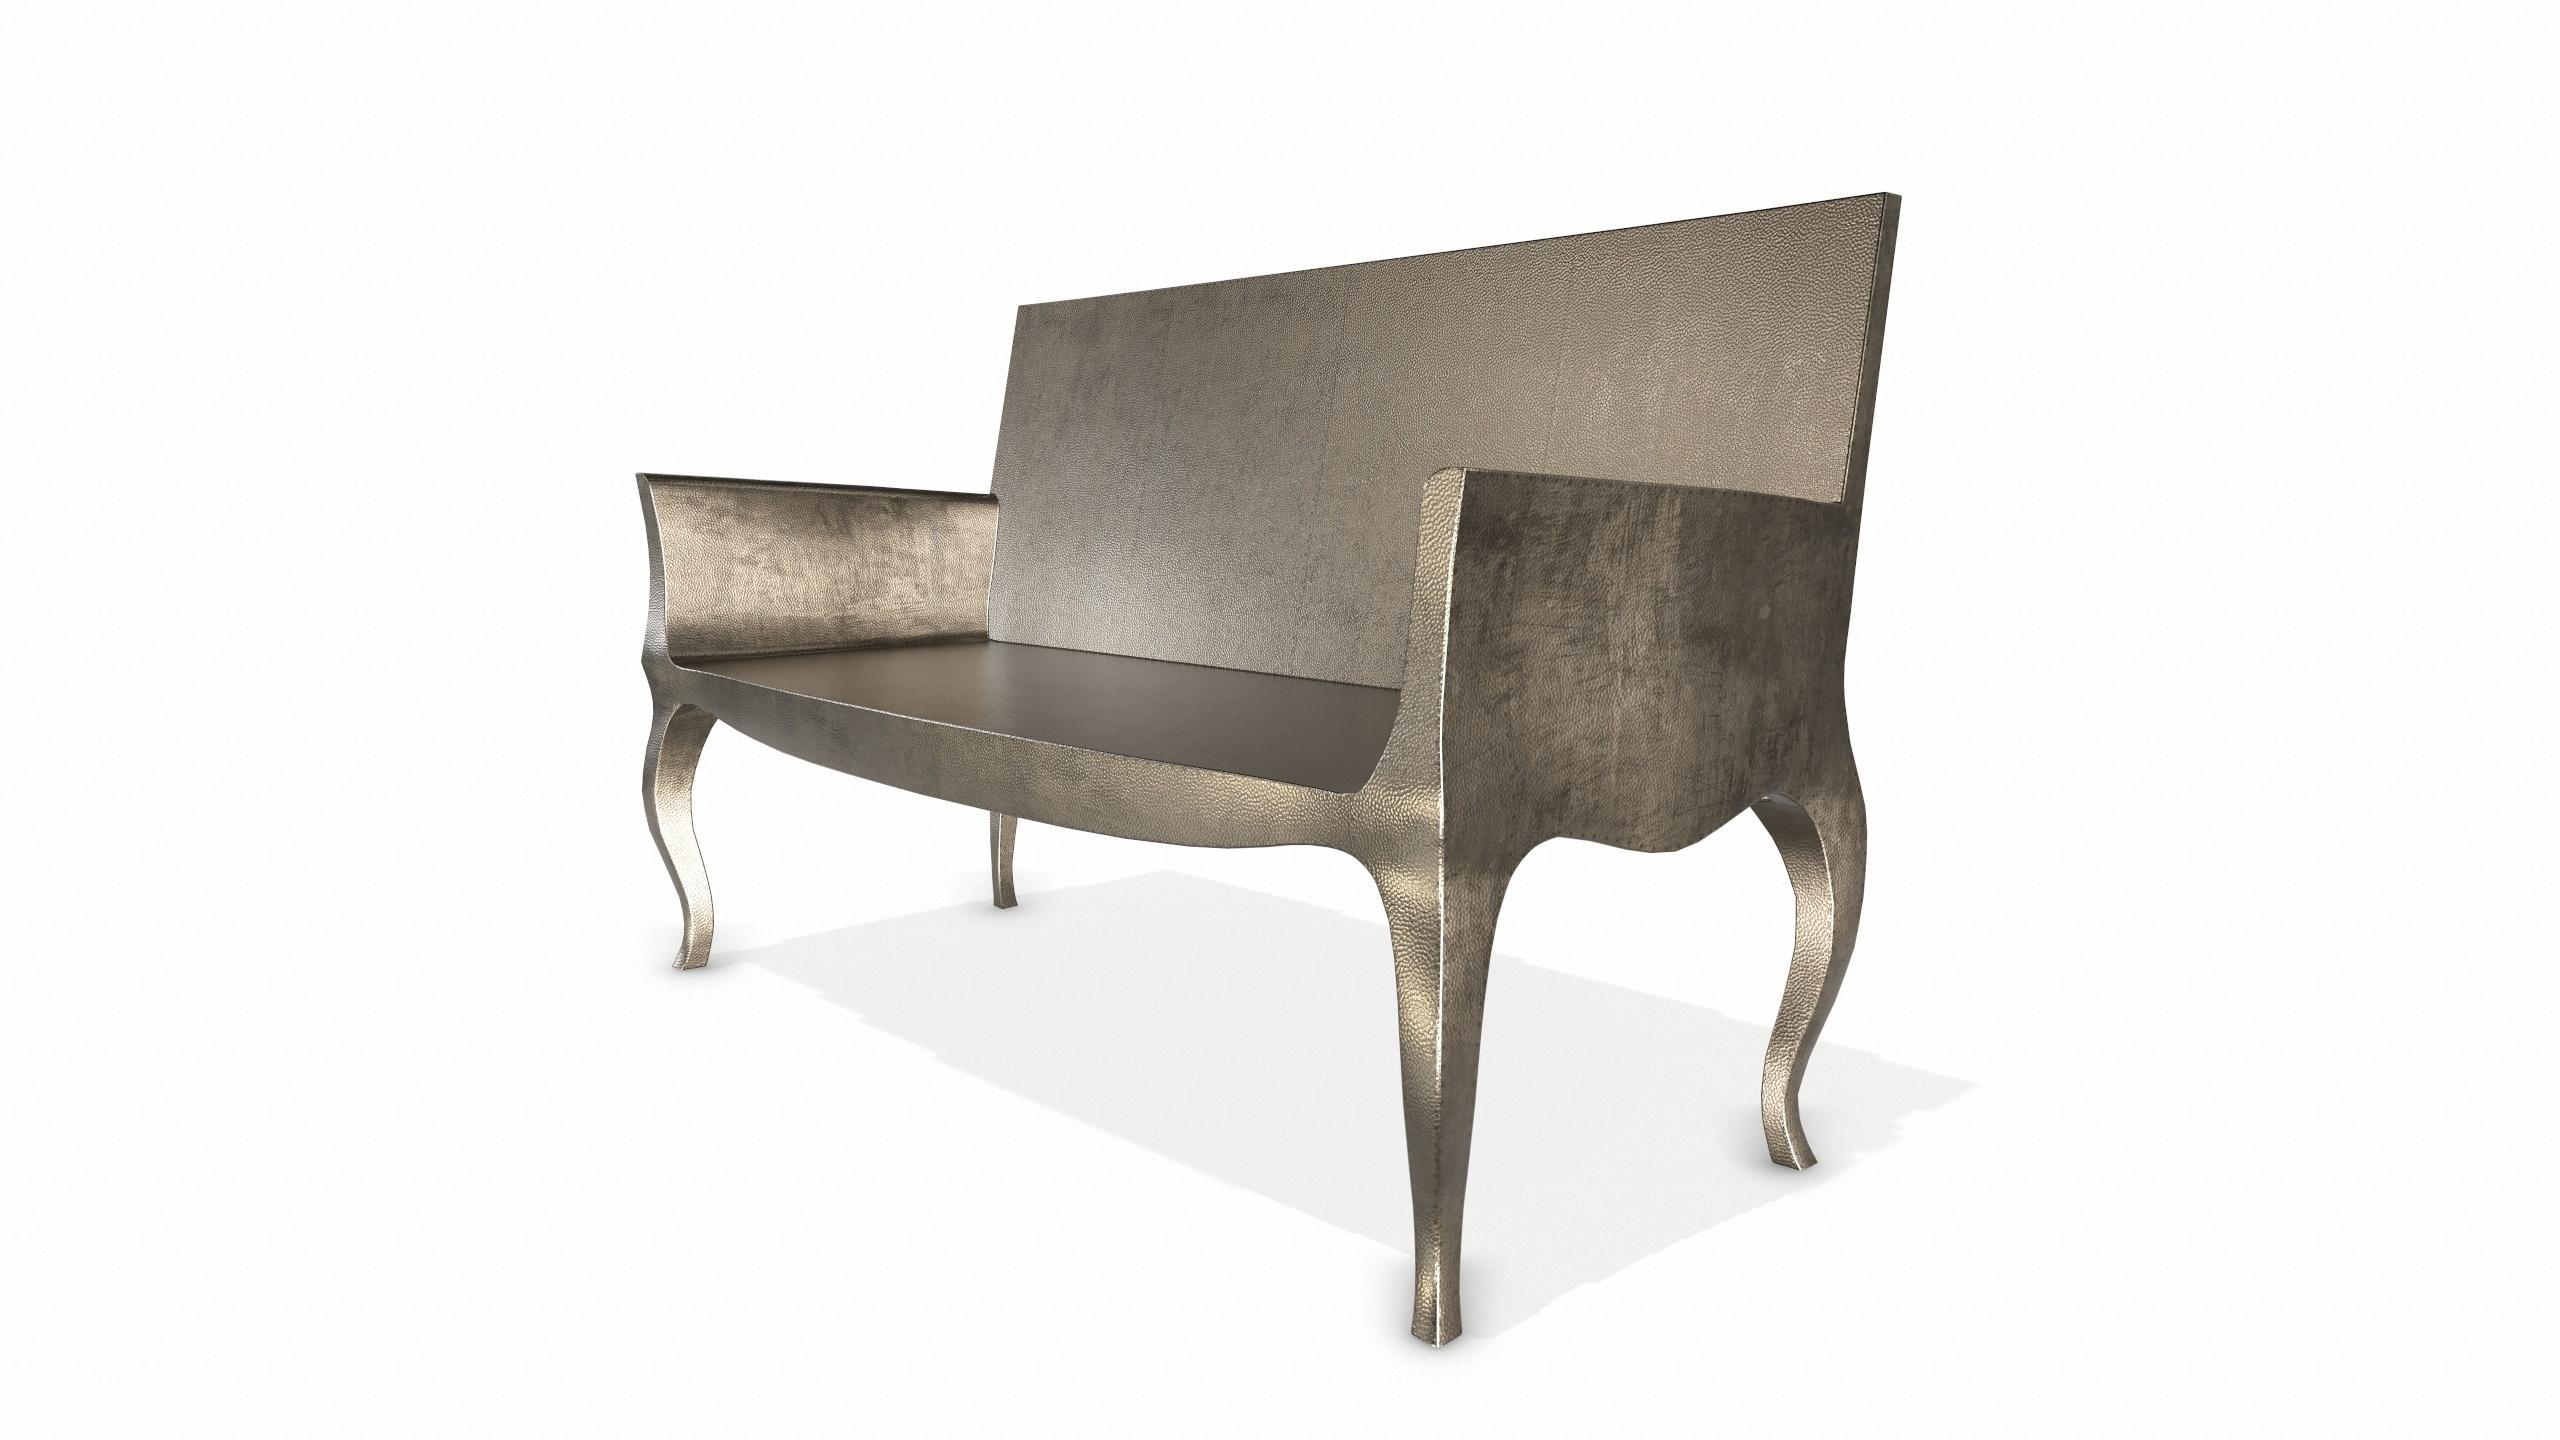 Woodwork Louise Settee Art Deco Settees in Mid. Hammered Antique Bronze by Paul Mathieu For Sale